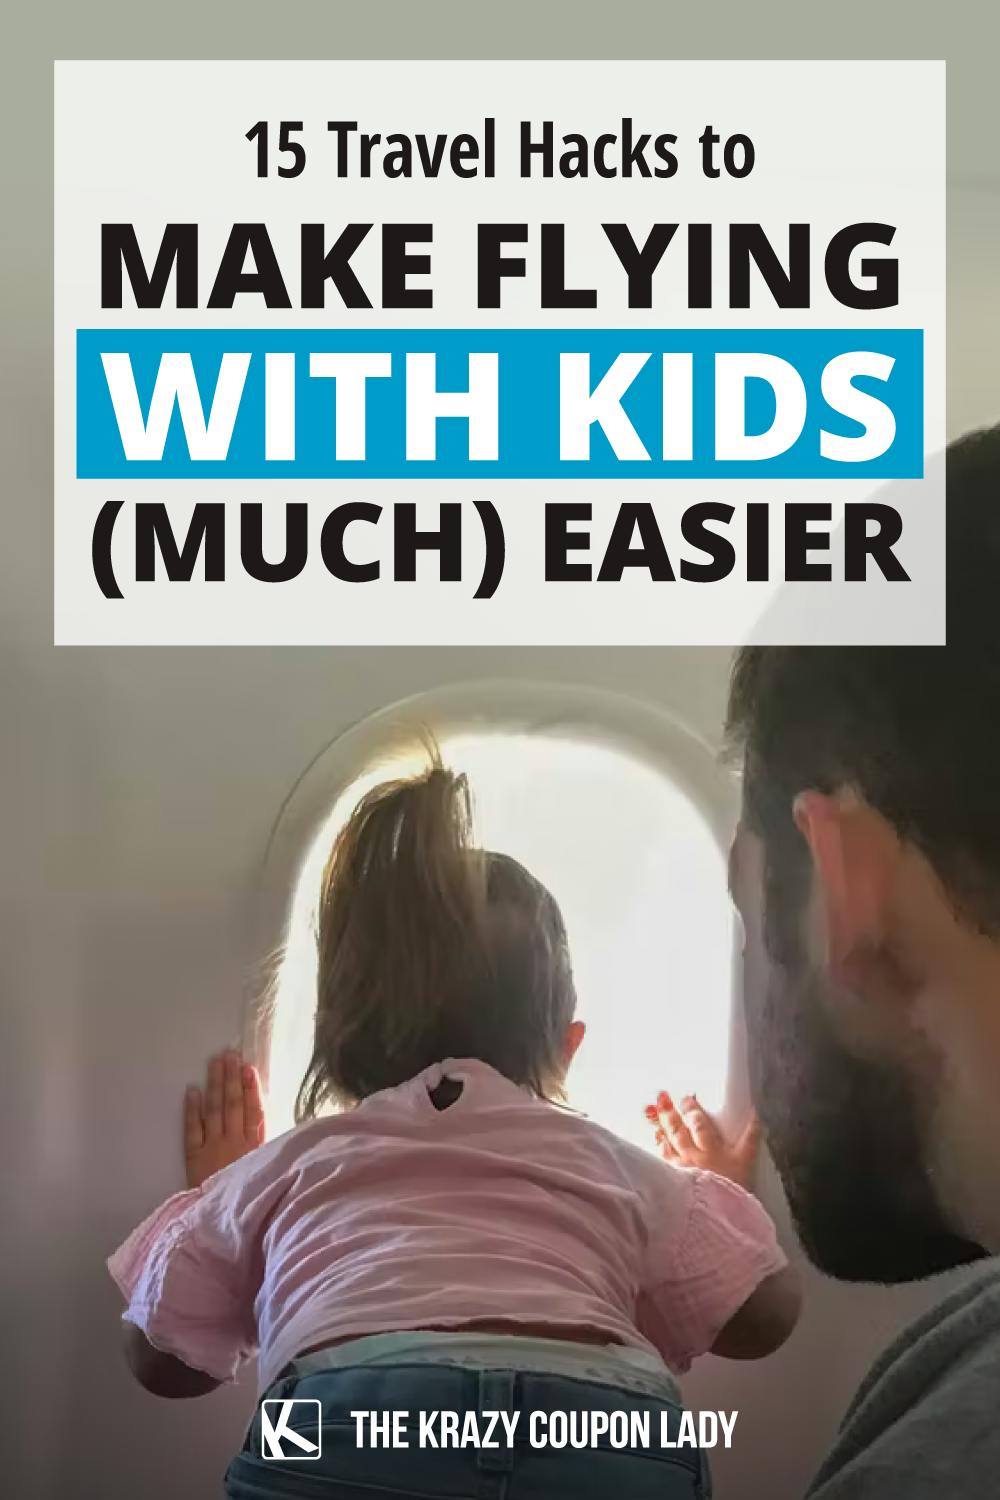 15 Travel Hacks to Make Flying With Kids (Much) Easier